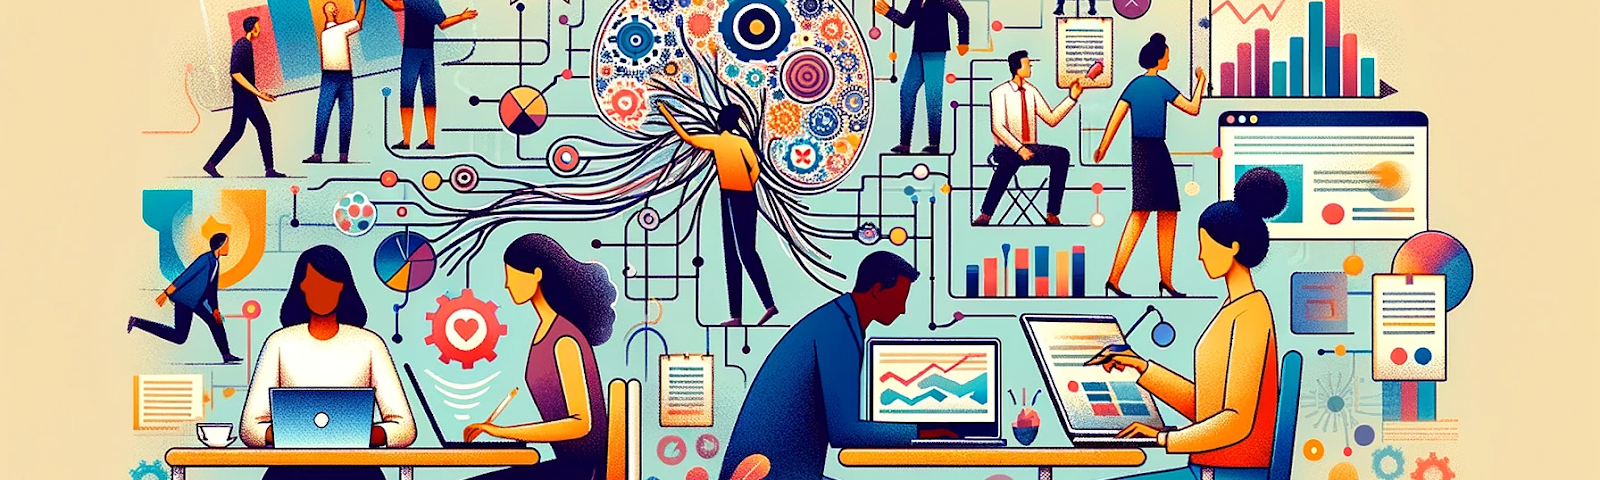 A colourful, stylized illustration depicts a dynamic office scene. Diverse individuals are shown working together and independently. In the foreground, two people work at desks with laptops. The middle ground shows a group collaborating on a project with sticky notes, while in the background others analyse data and brainstorm. The art style is modern and abstract, with intricate details suggesting a hub of creativity and teamwork.